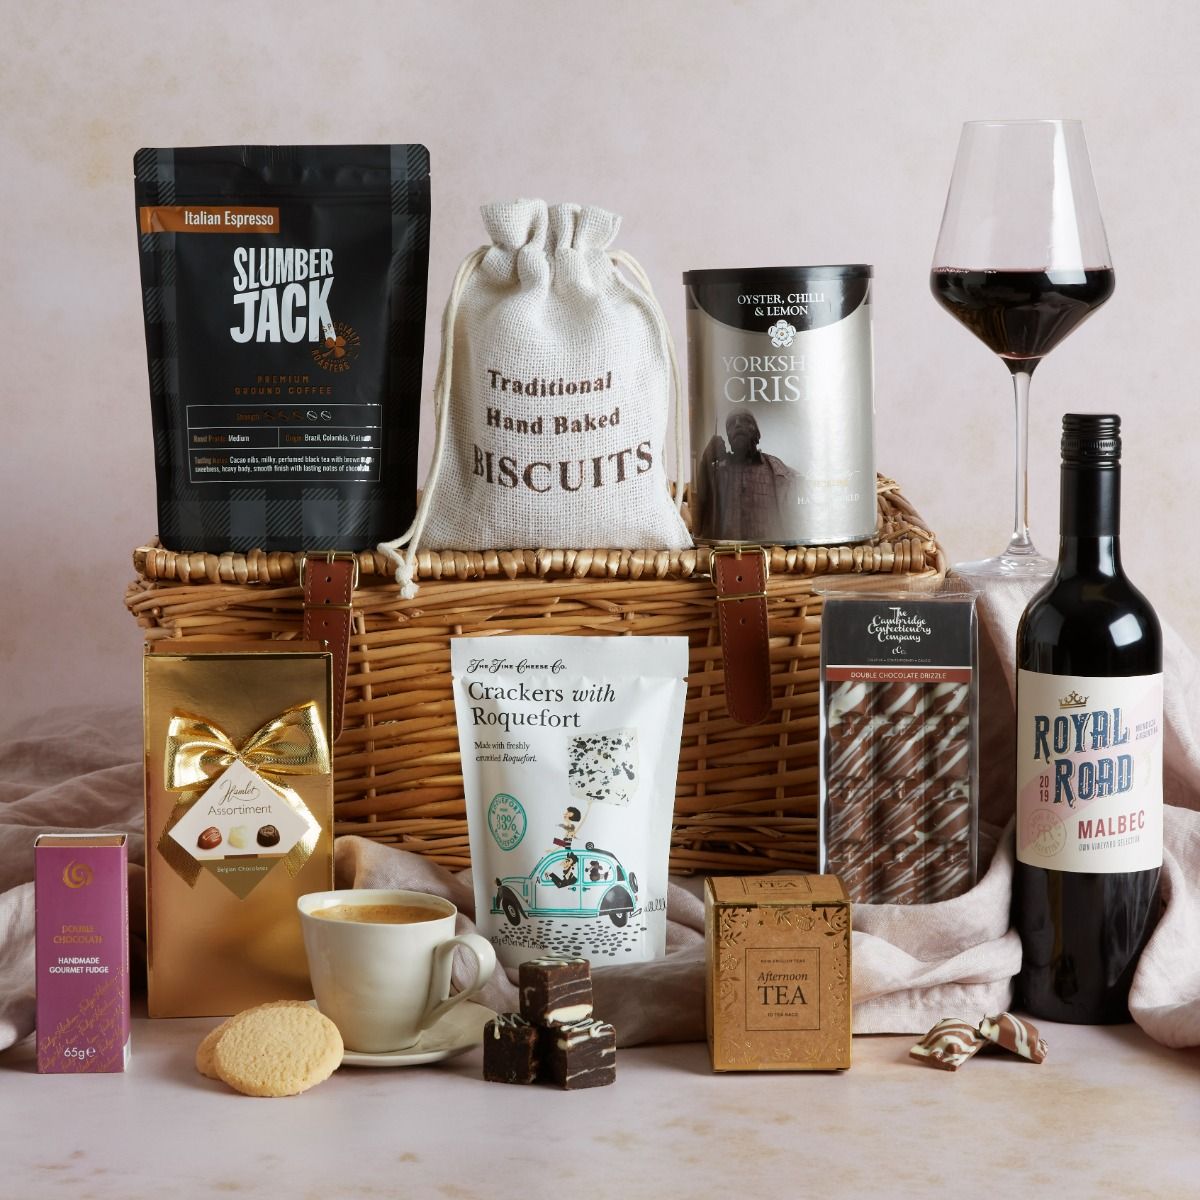 The classic food and drink hamper